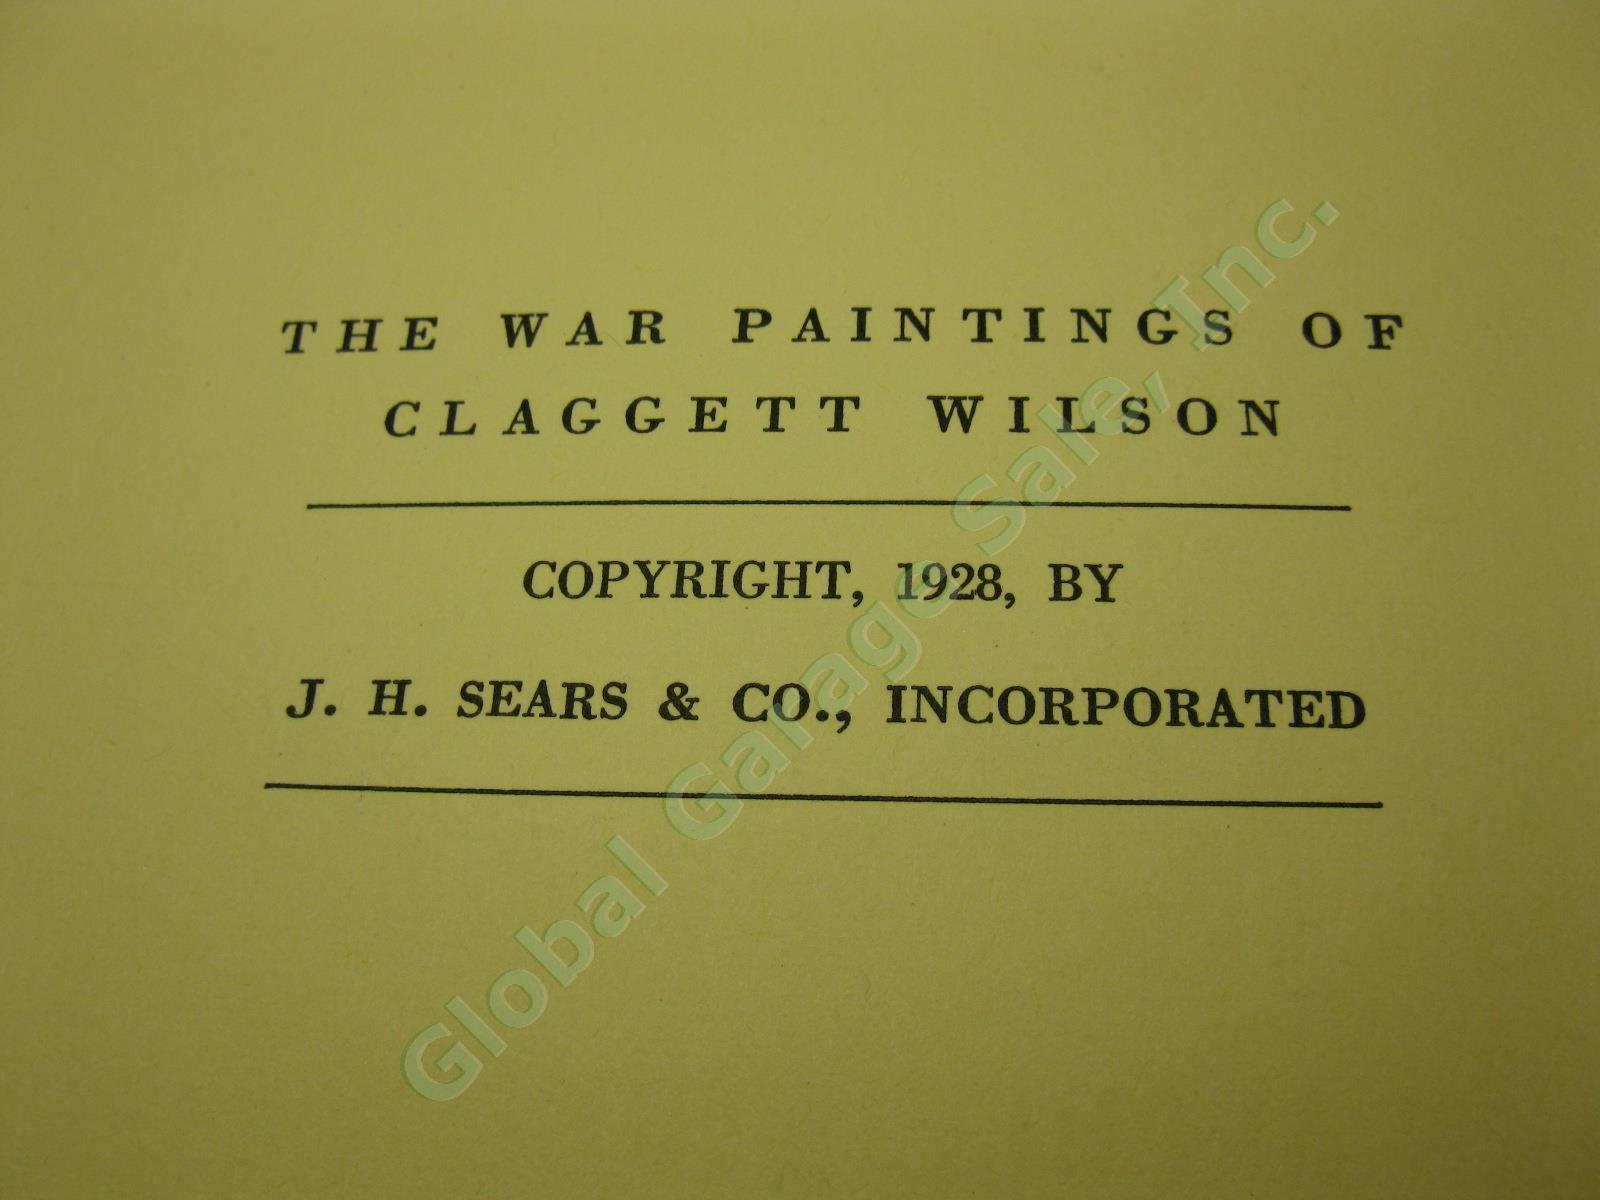 The War Paintings of Claggett Wilson Rare Vtg Antique 1928 Hardcover Book No DJ 5